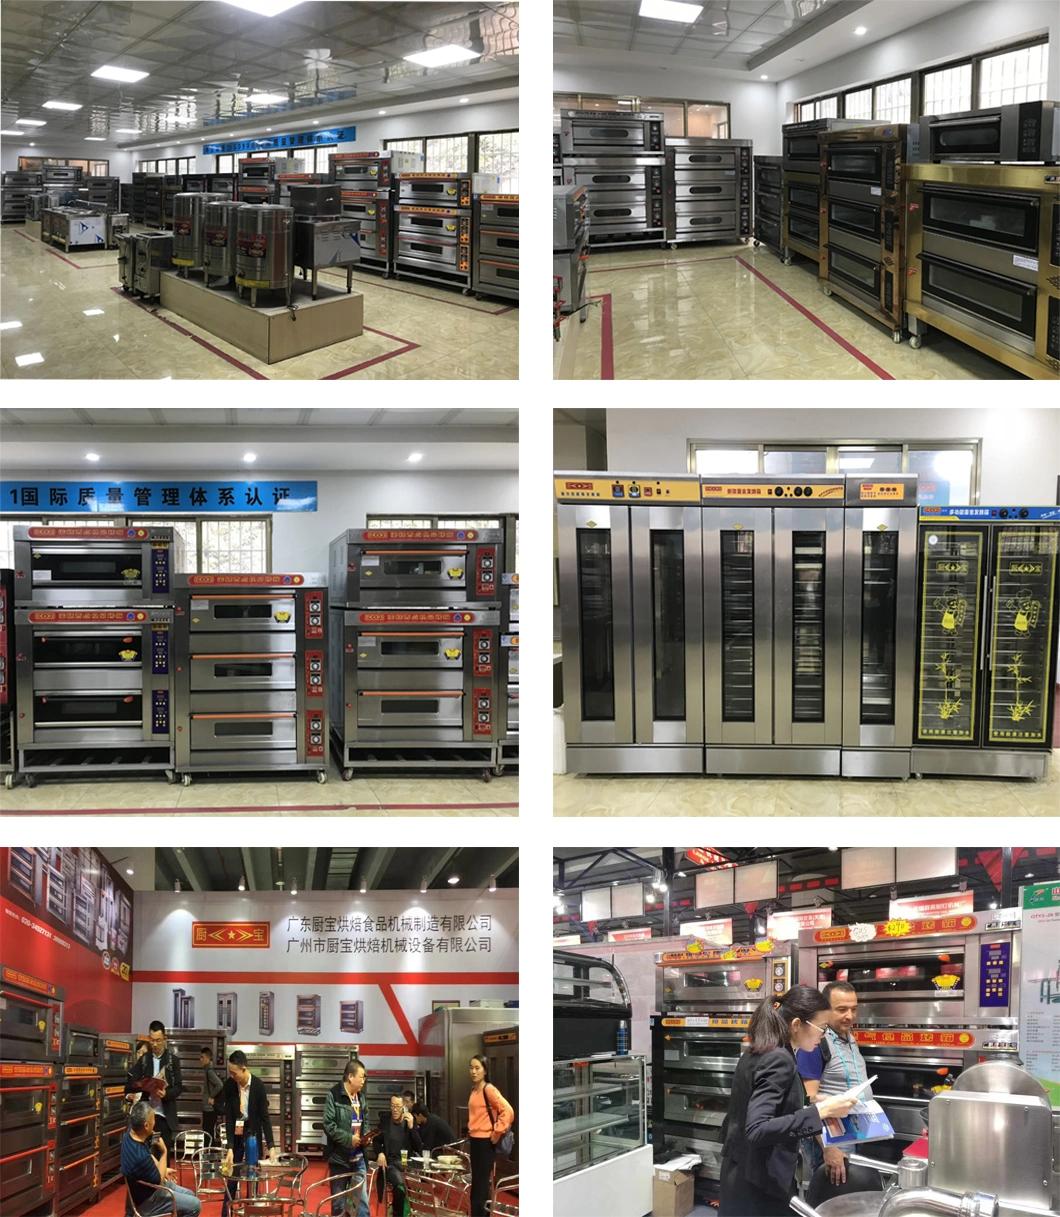 Commercial Restaurant Kitchen 1 Deck 2 Trays Gas Oven for Baking Equipment Bakery Machinery Food Machine